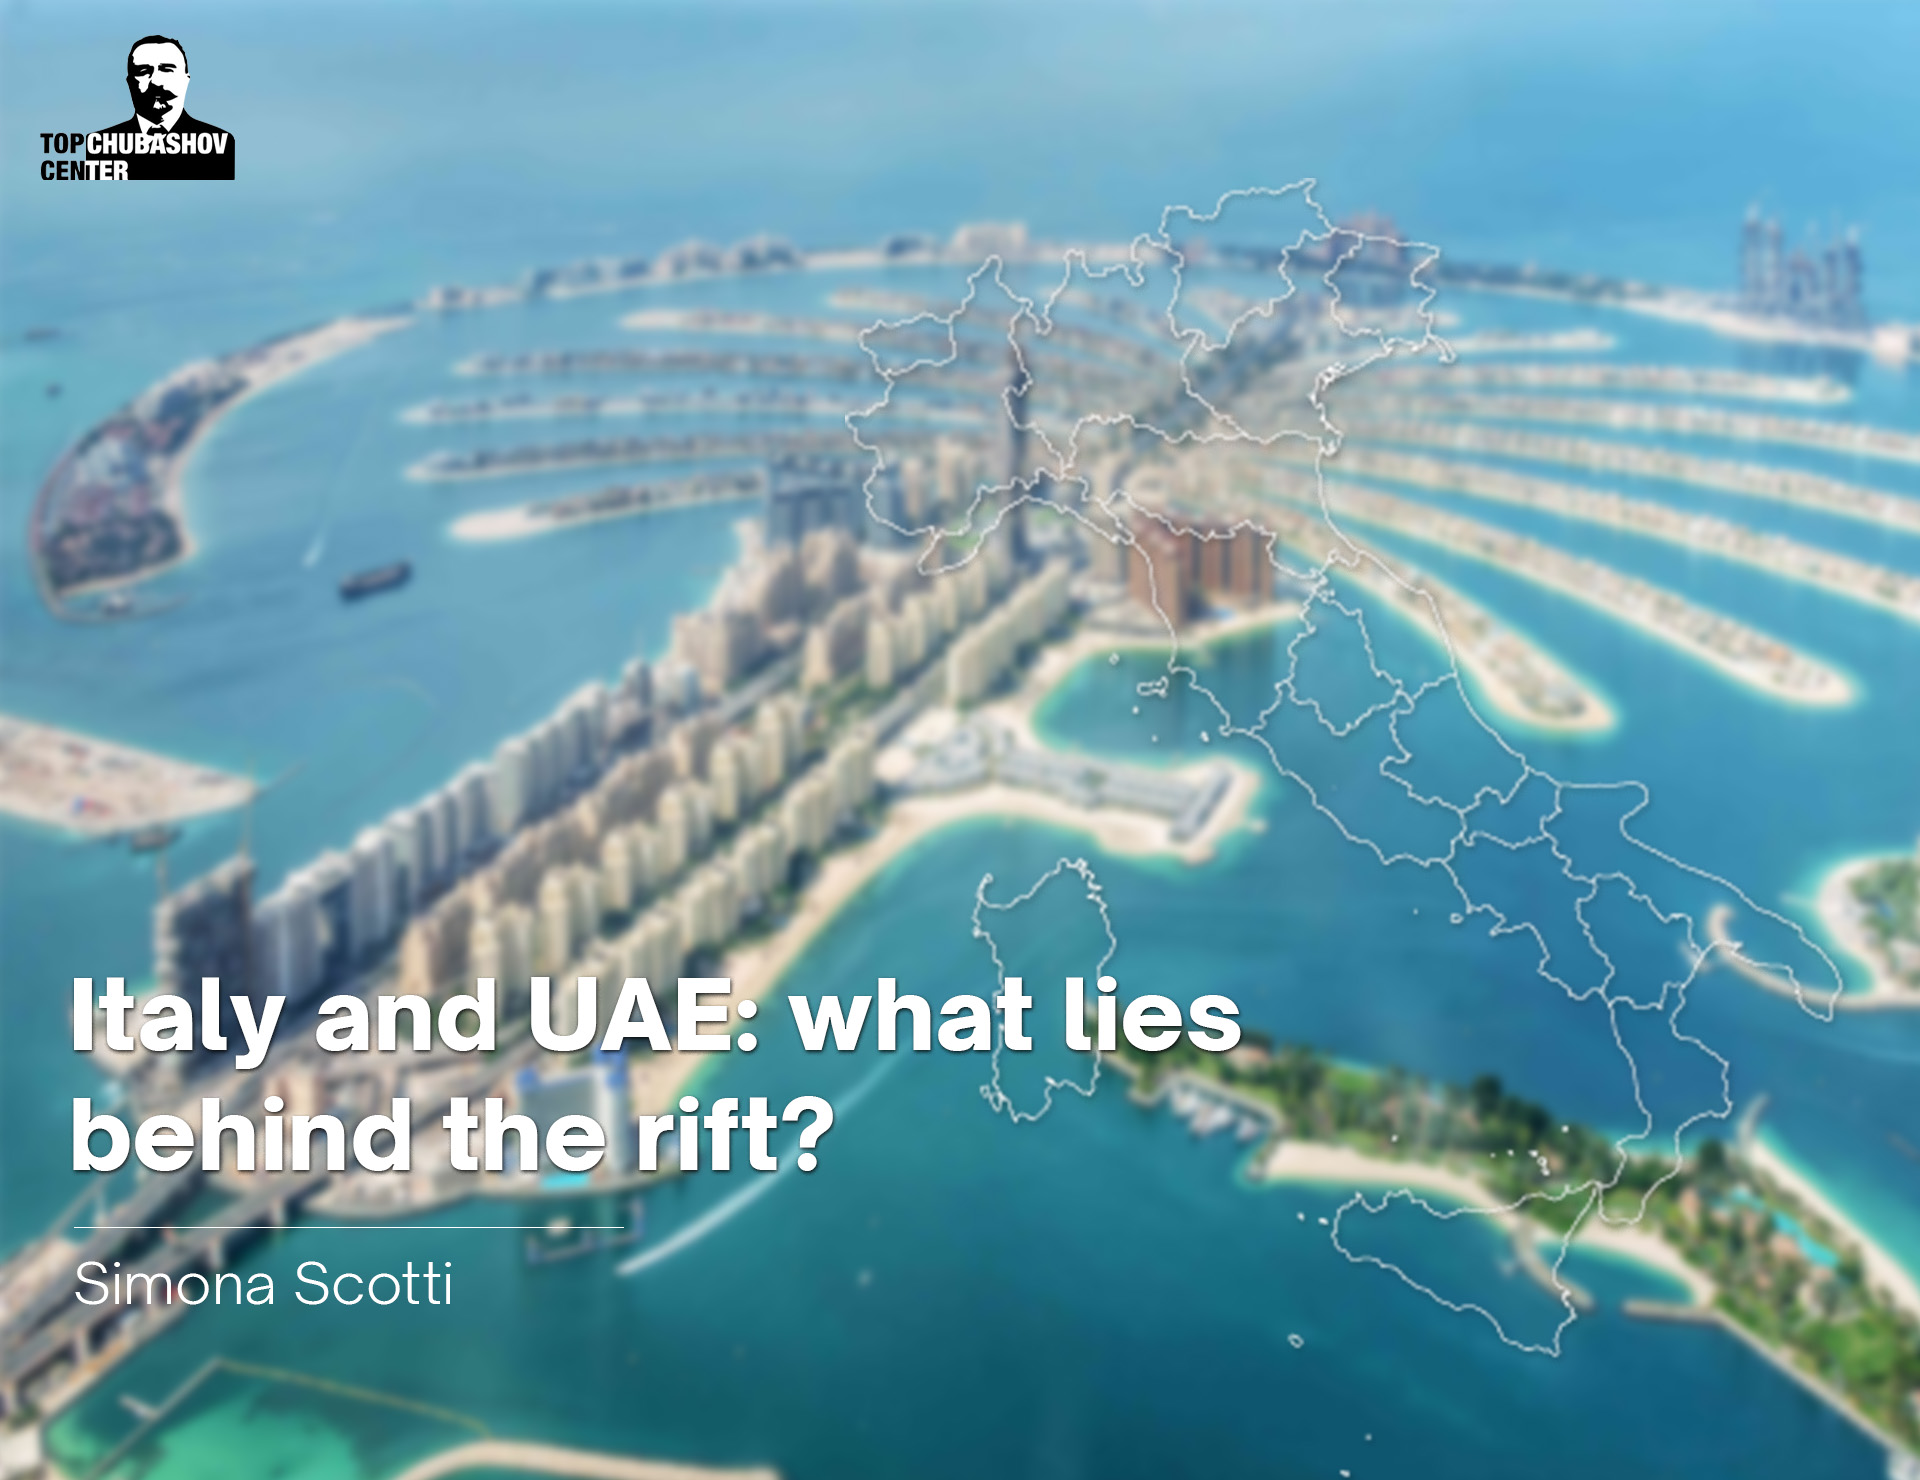 Italy and UAE: what lies behind the rift?